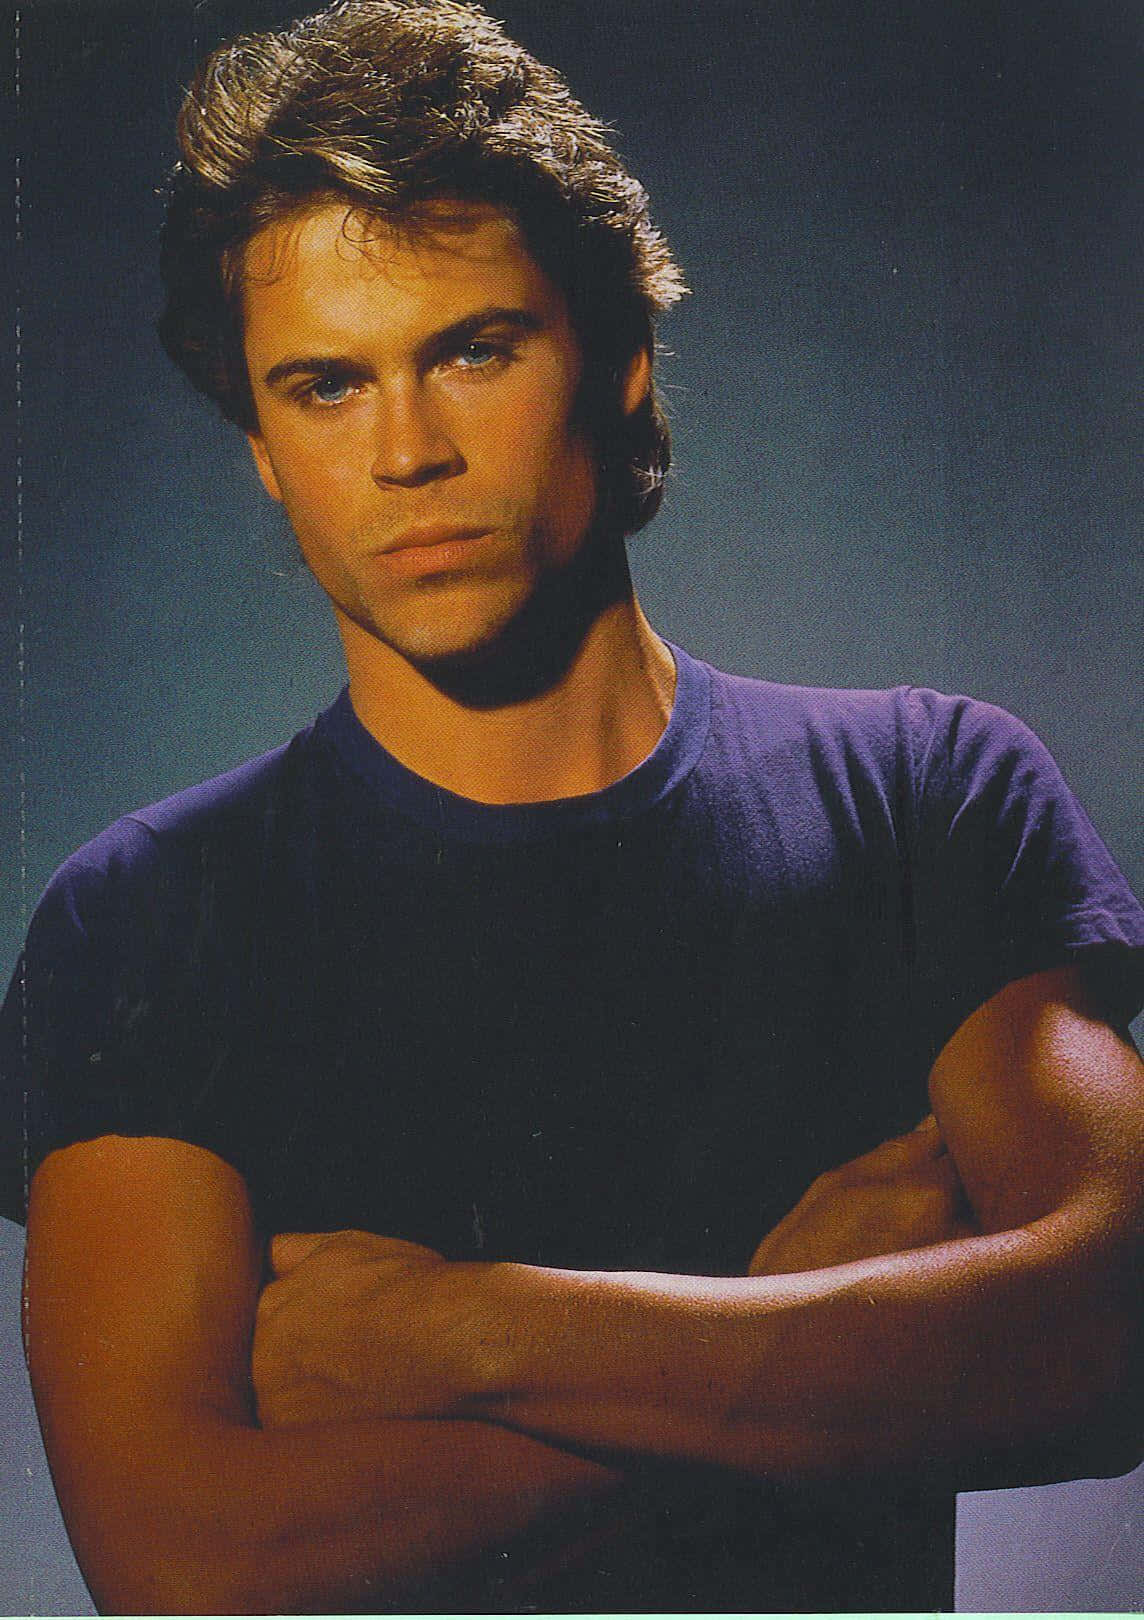 Actor Rob Lowe